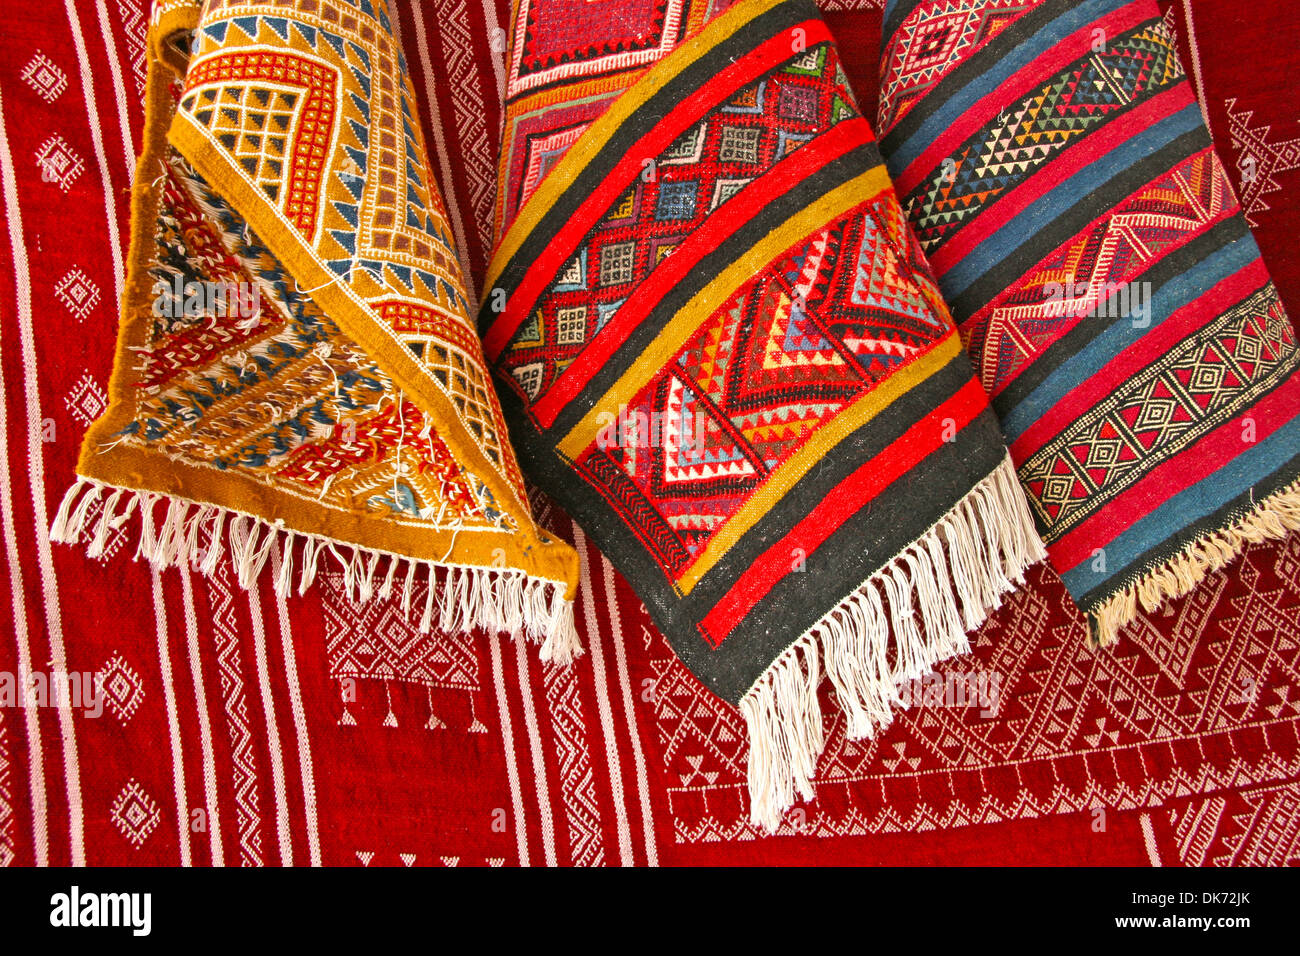 Pile of North African rugs in red, orange & brown shades, Tunisia. Stock Photo